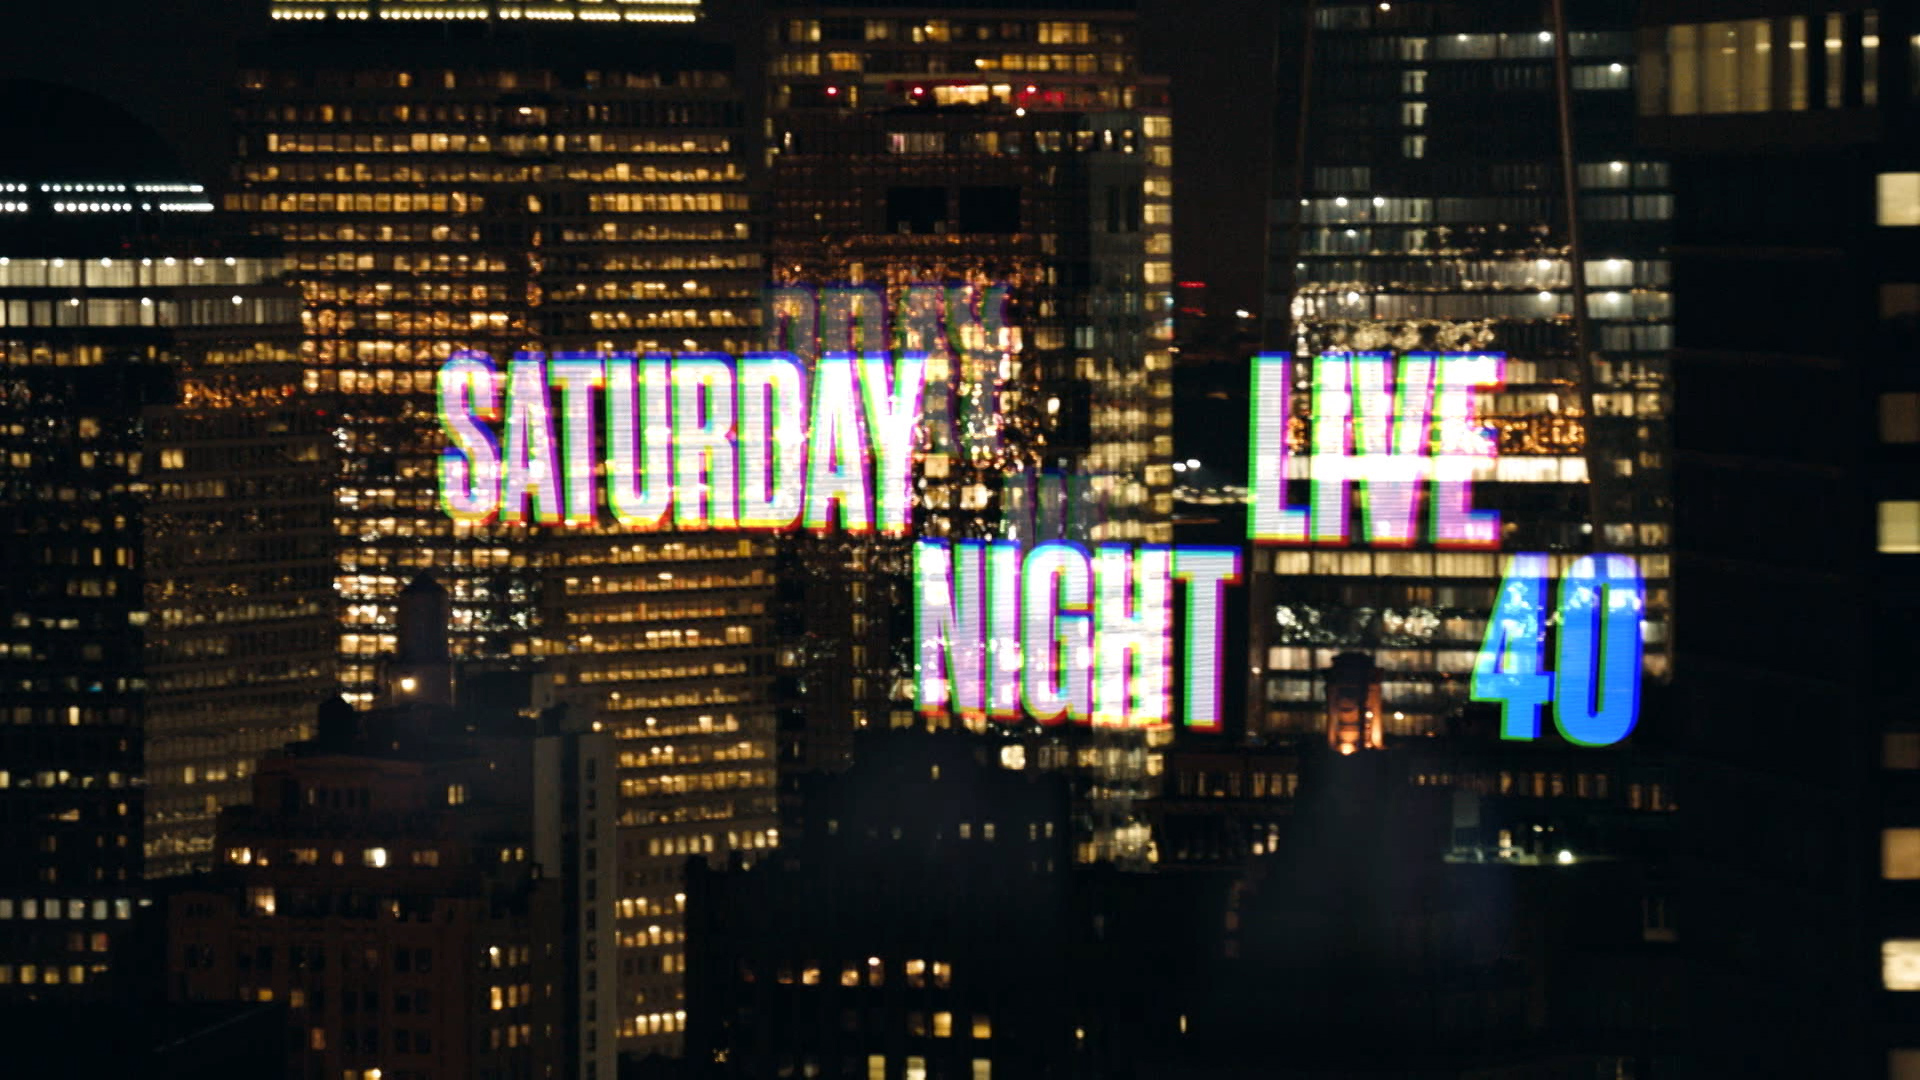 Watch SNL40 Opening Montage From Saturday Night Live